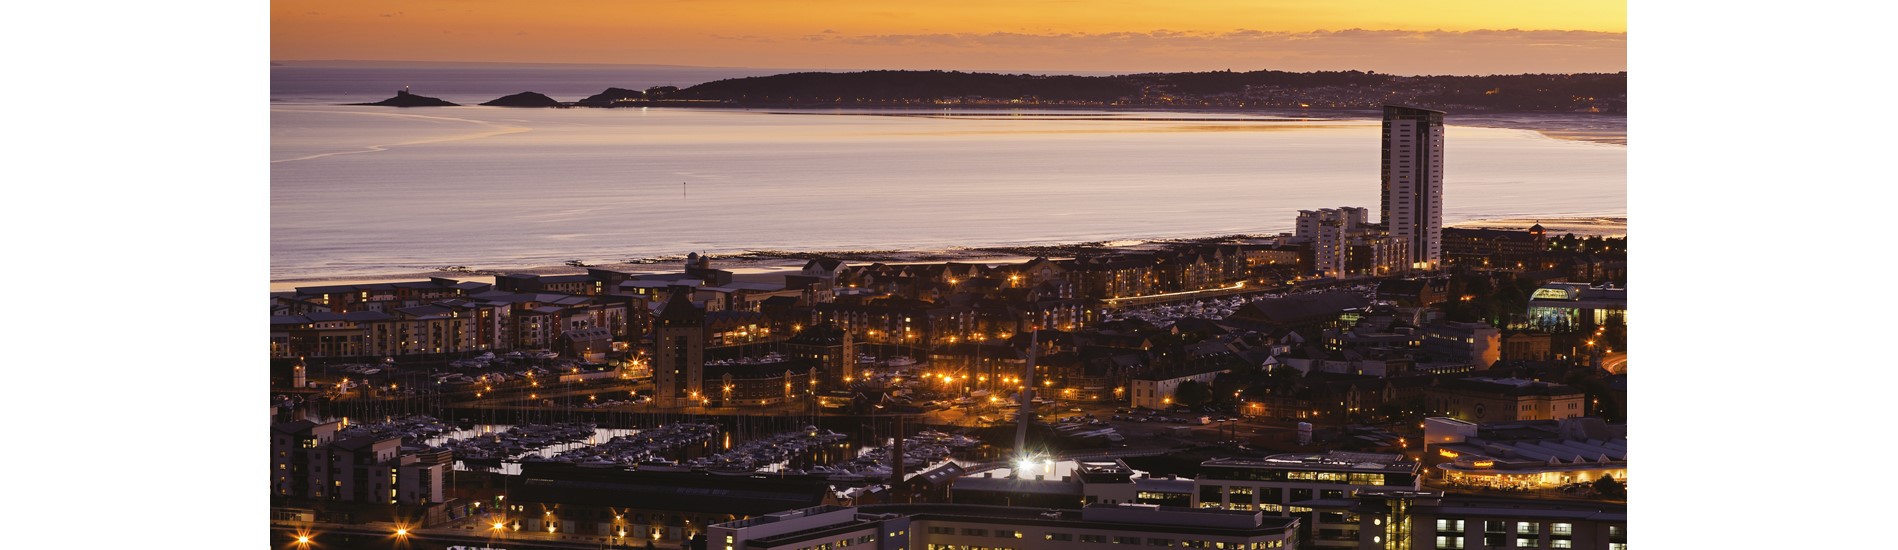 Sunset over Swansea City and the Bay